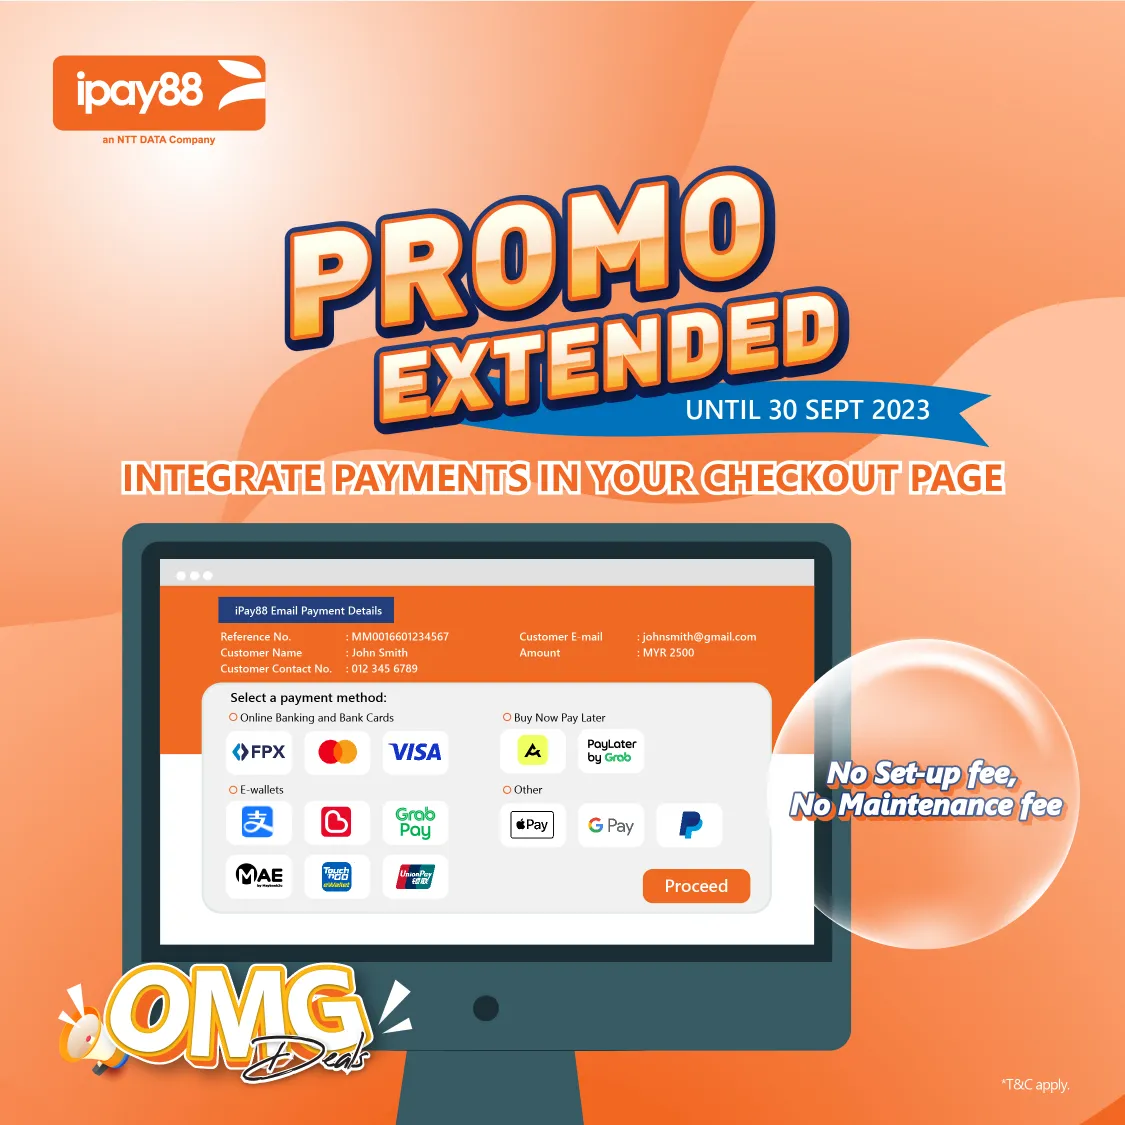 OMG Deals E-commerce Payment Solution Promo - Extended - iPay88